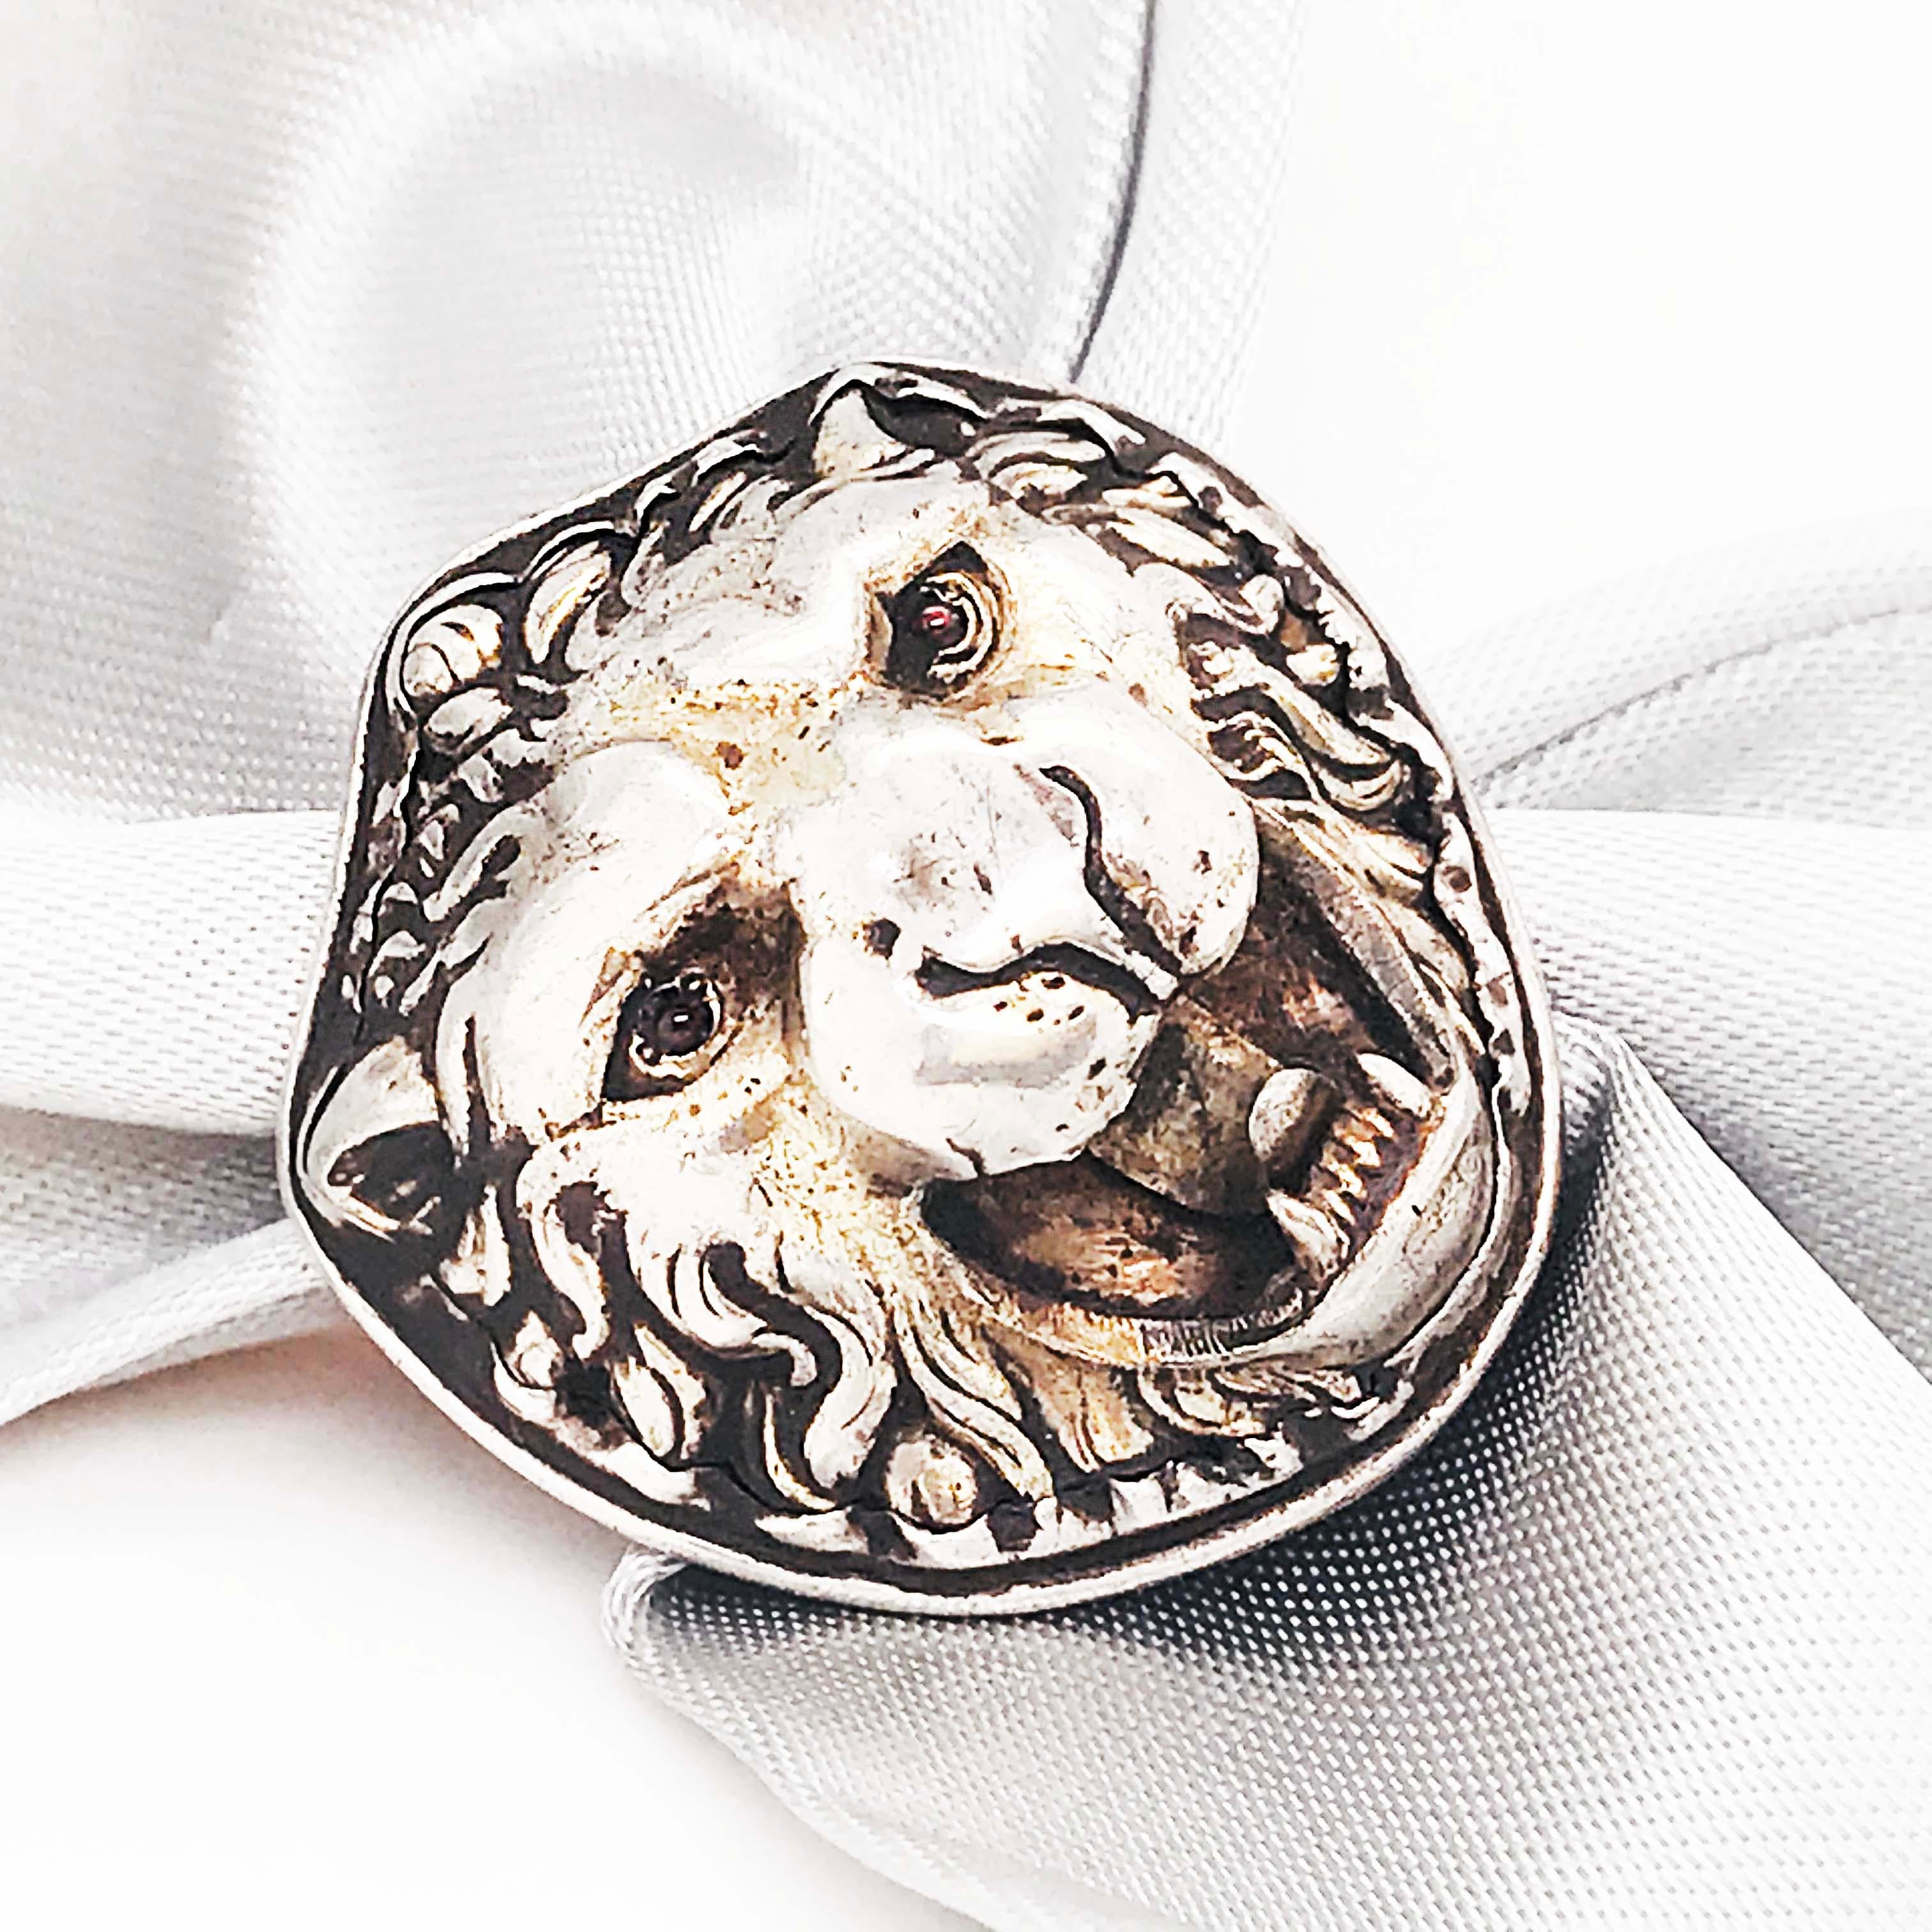 Antique Edwardian 3-D Lion Ring with Ruby Eyes in Sterling Silver 2